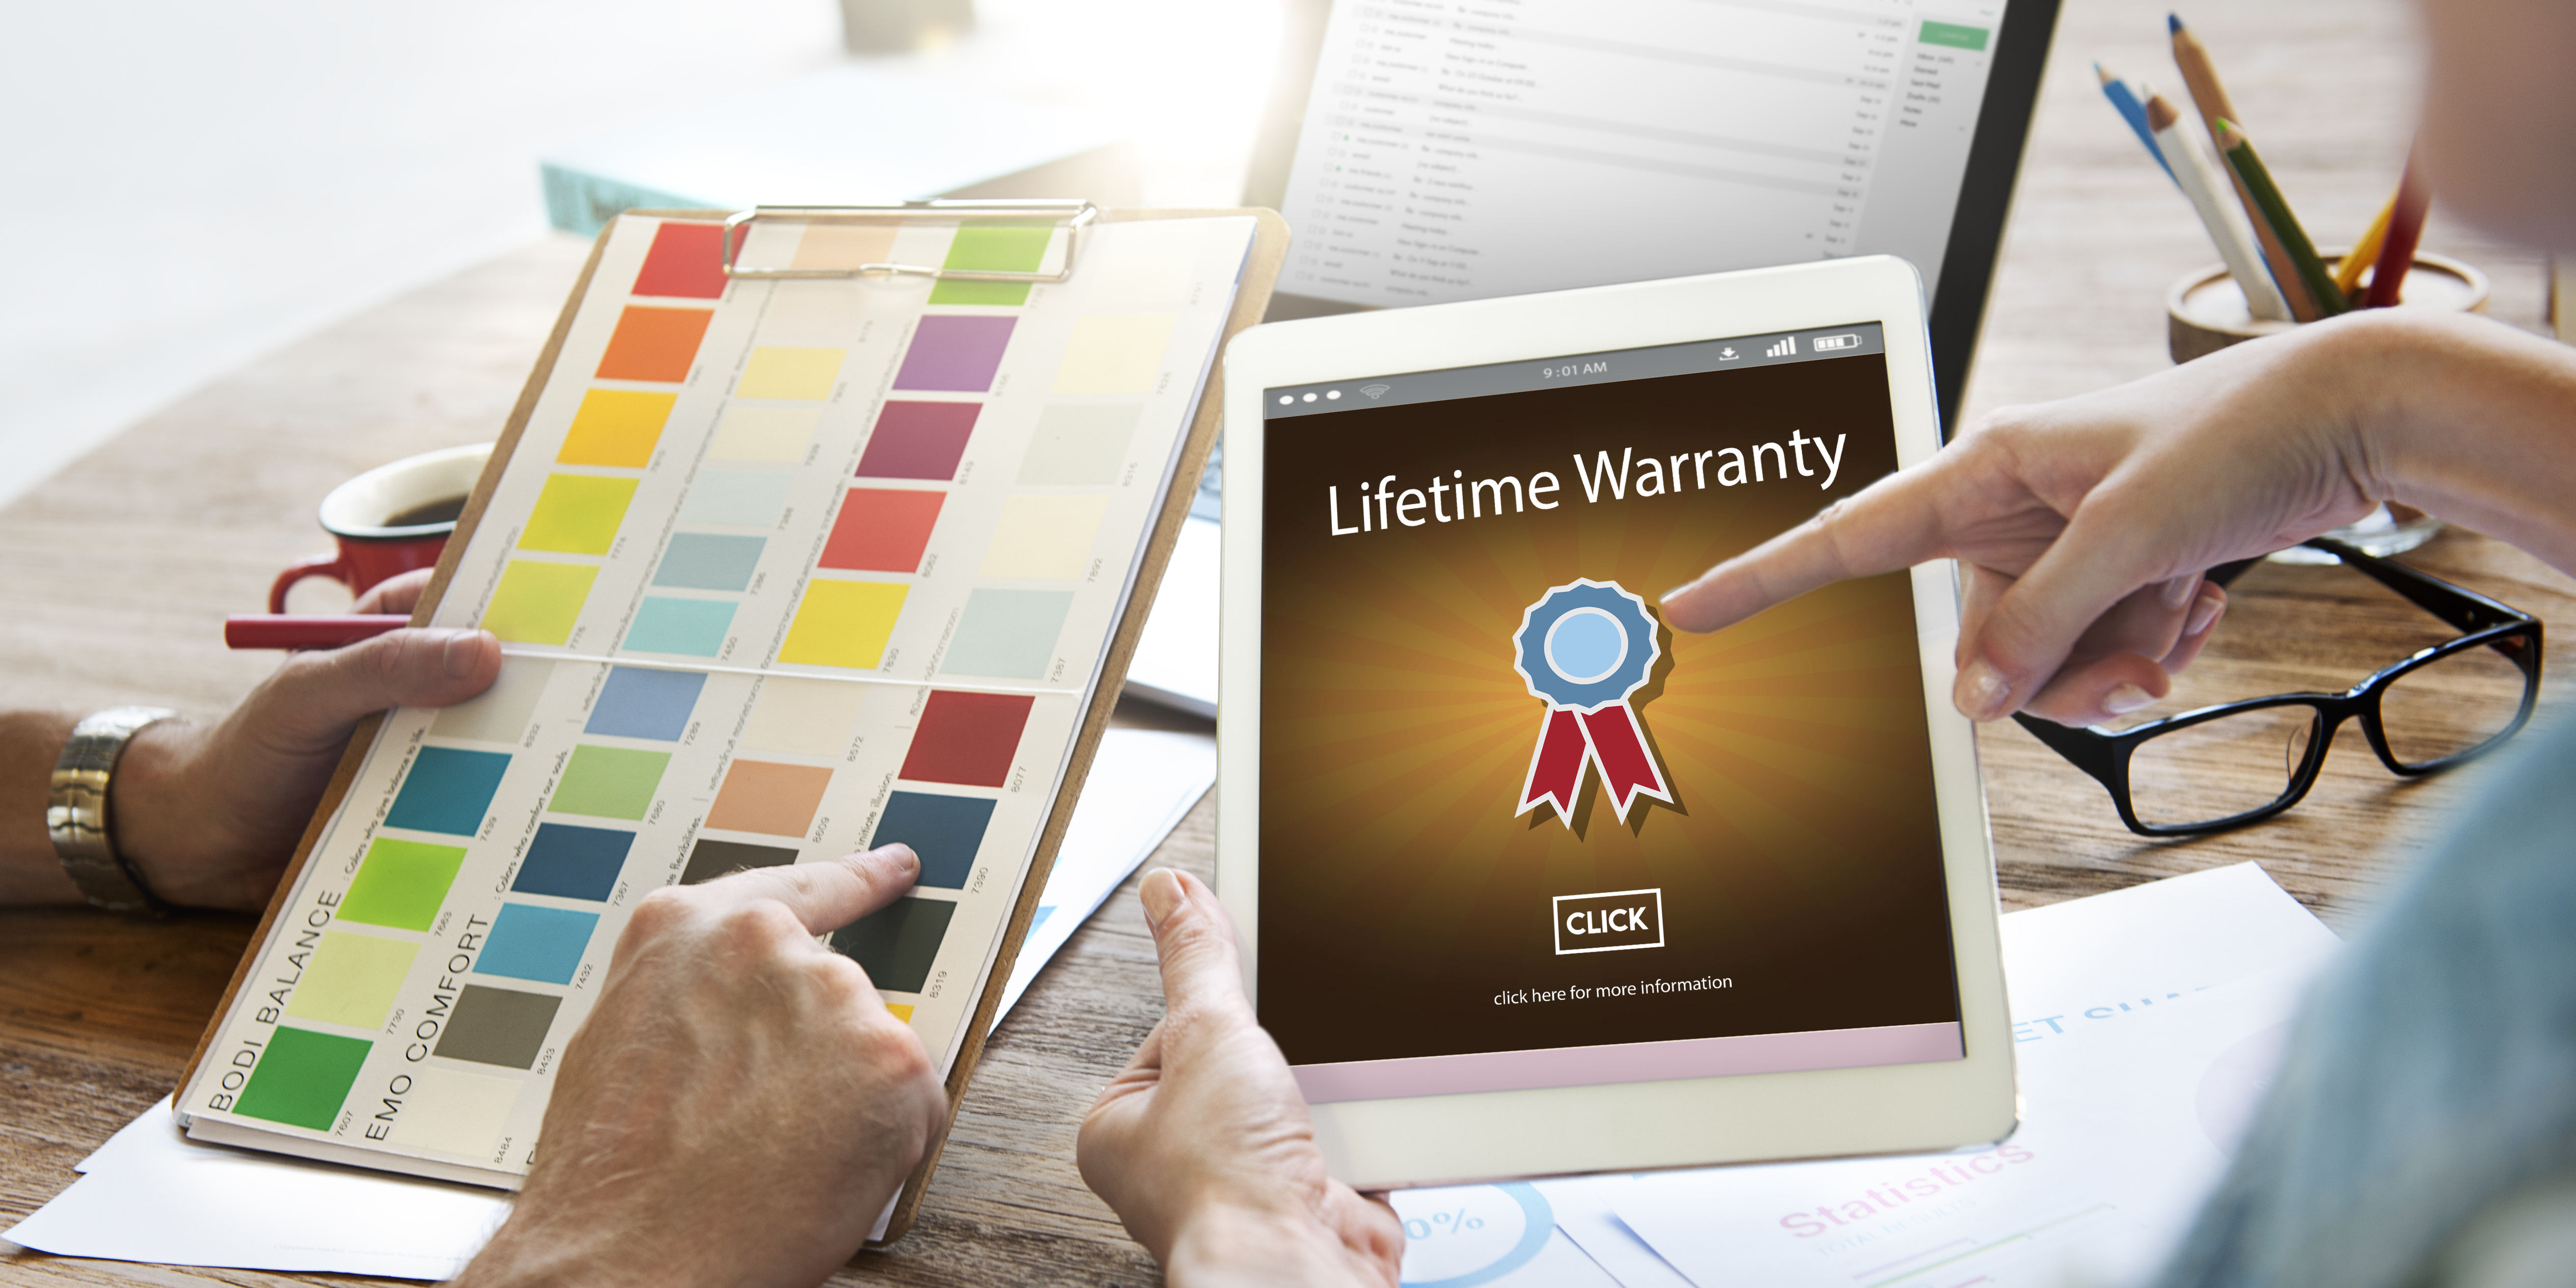 Person pointing to a tablet that has an image of a lifetime warranty on it